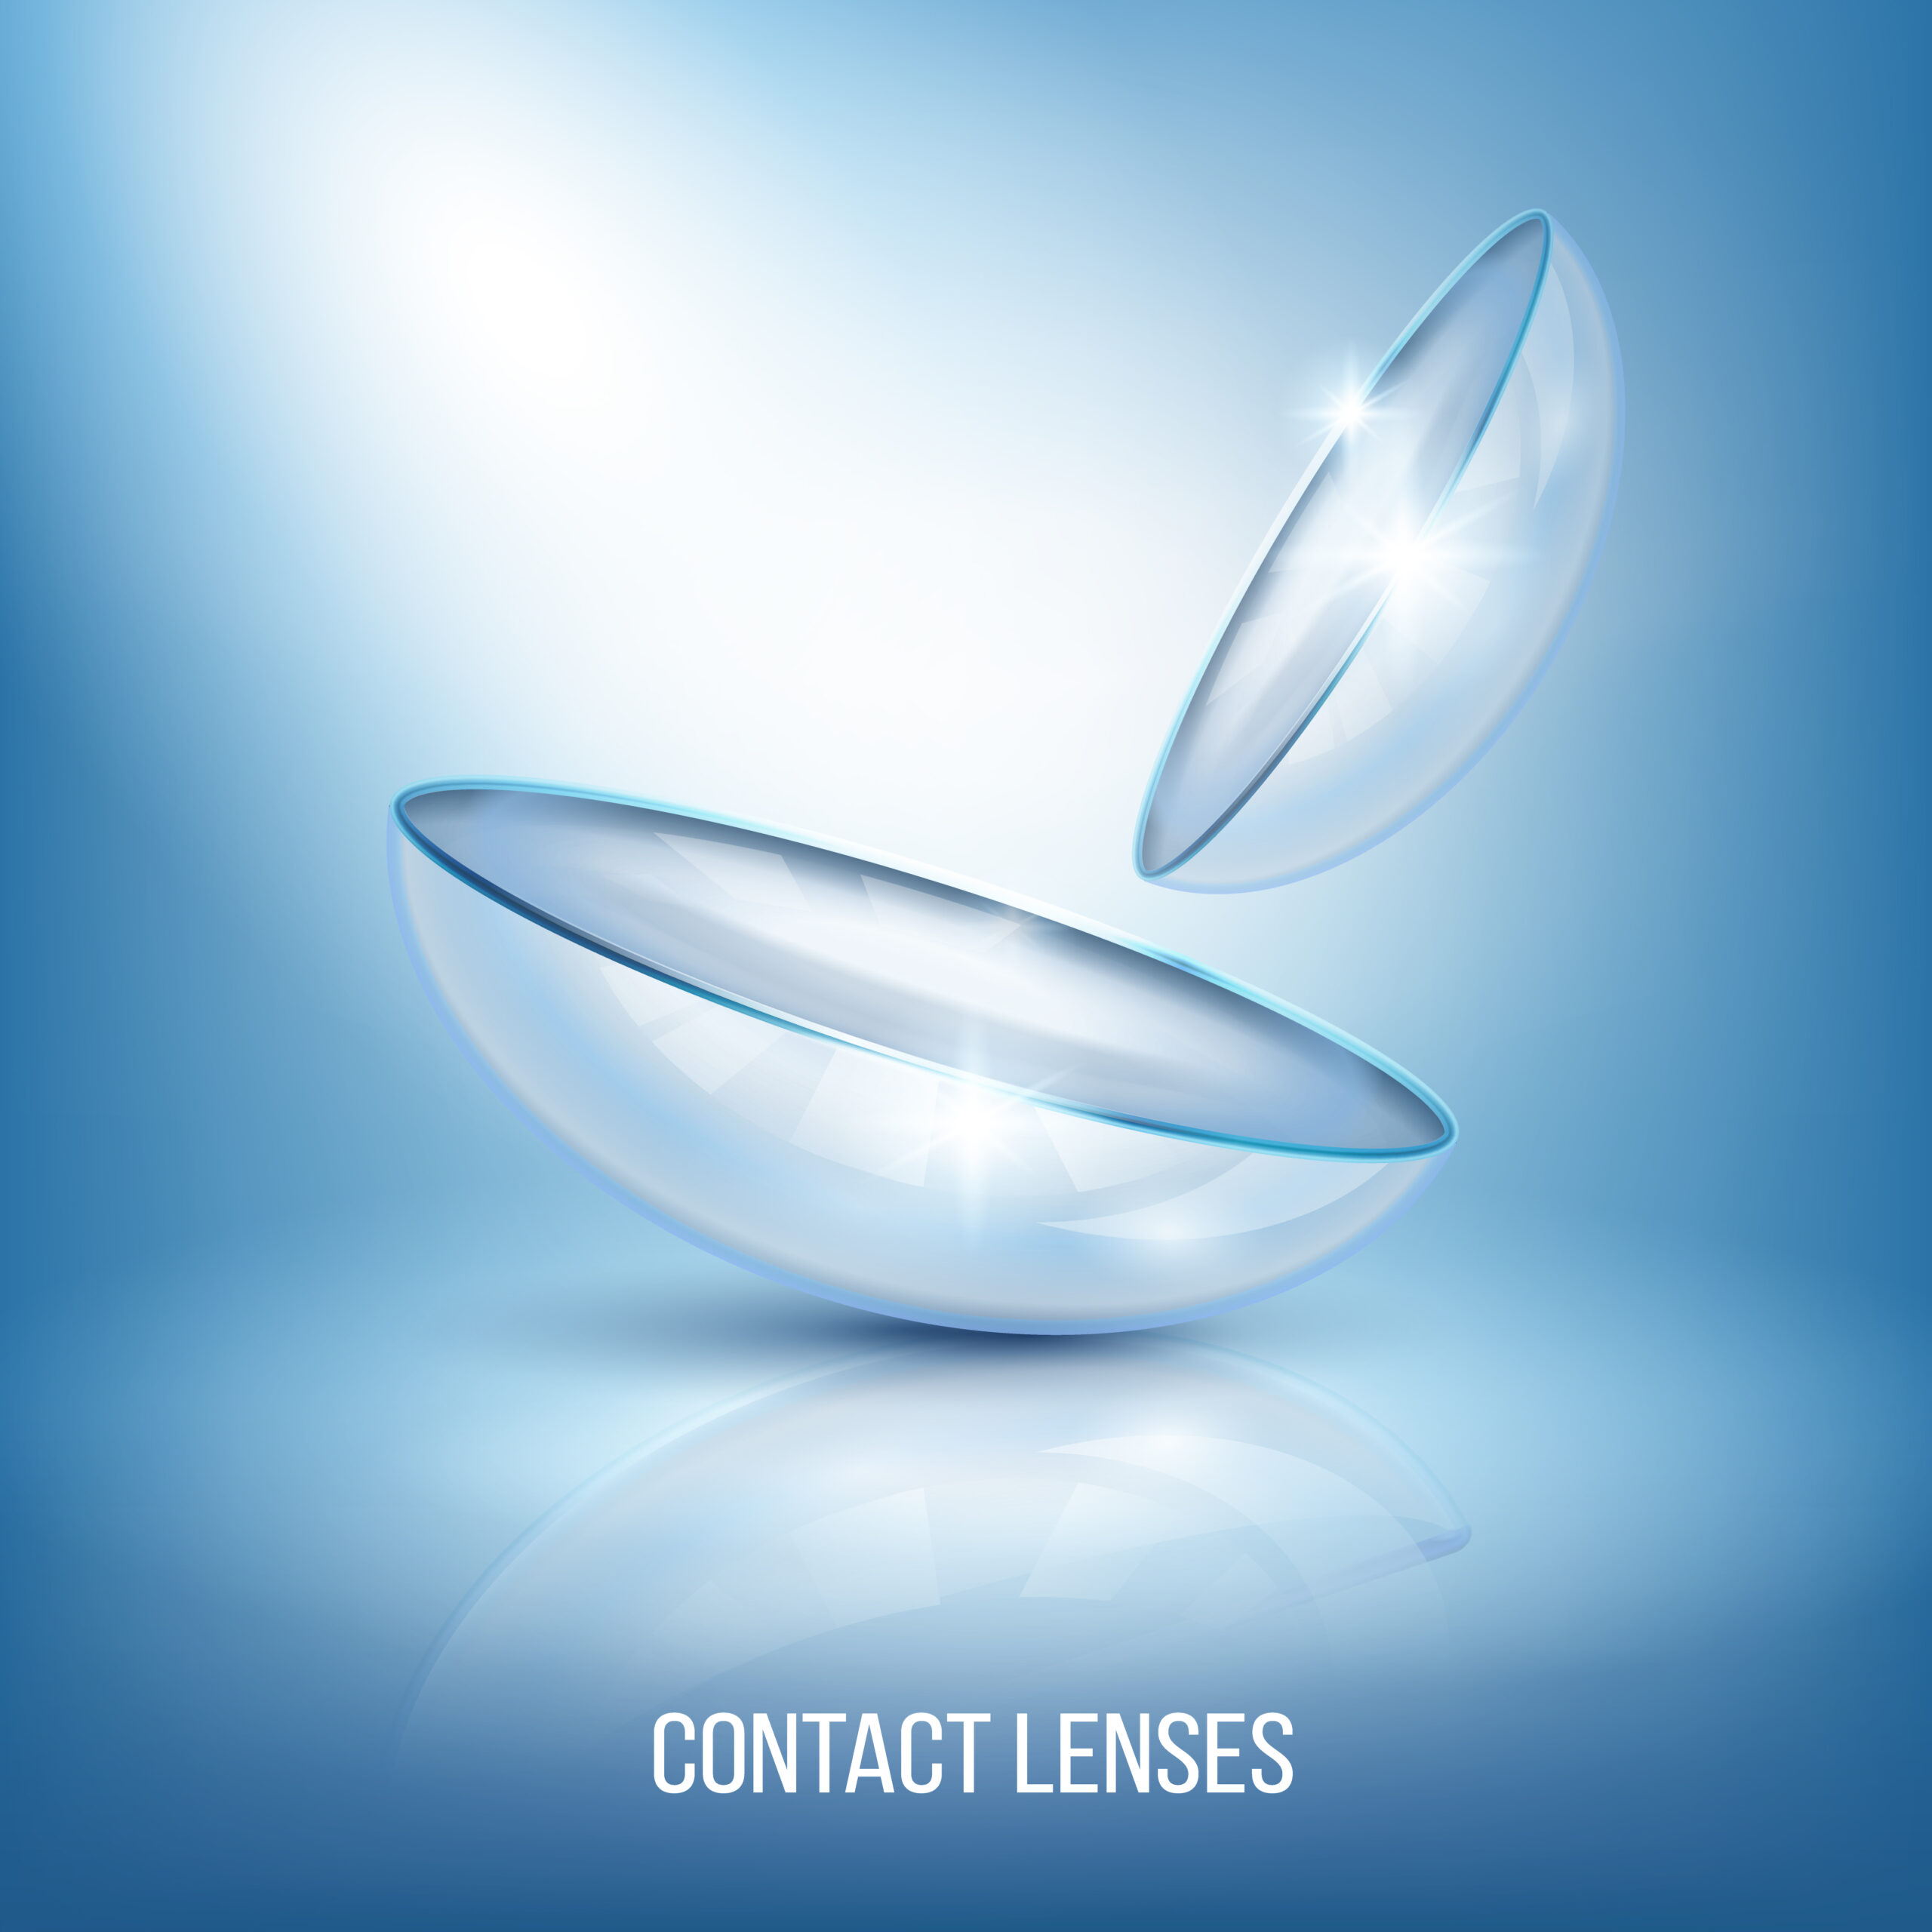 Realistic glossy eye lenses with reflection, composition on blue background with illumination vector illustration